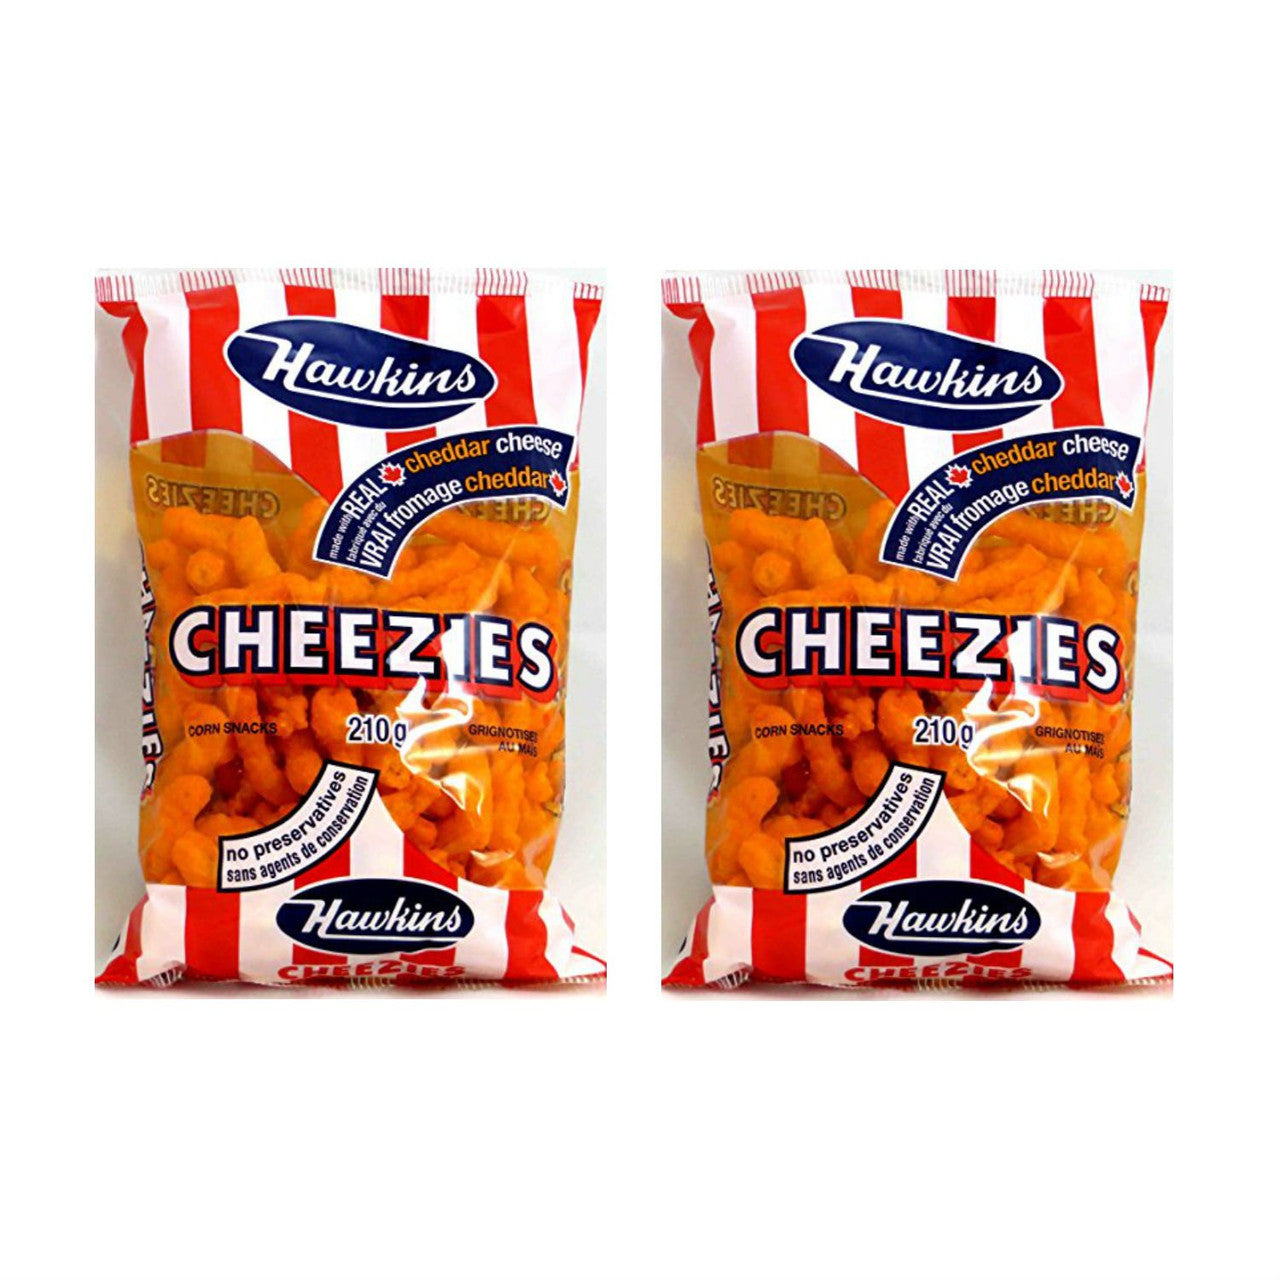 Hawkins Cheezies - 210g/7.4 oz., (2 pack) {Imported from Canada}